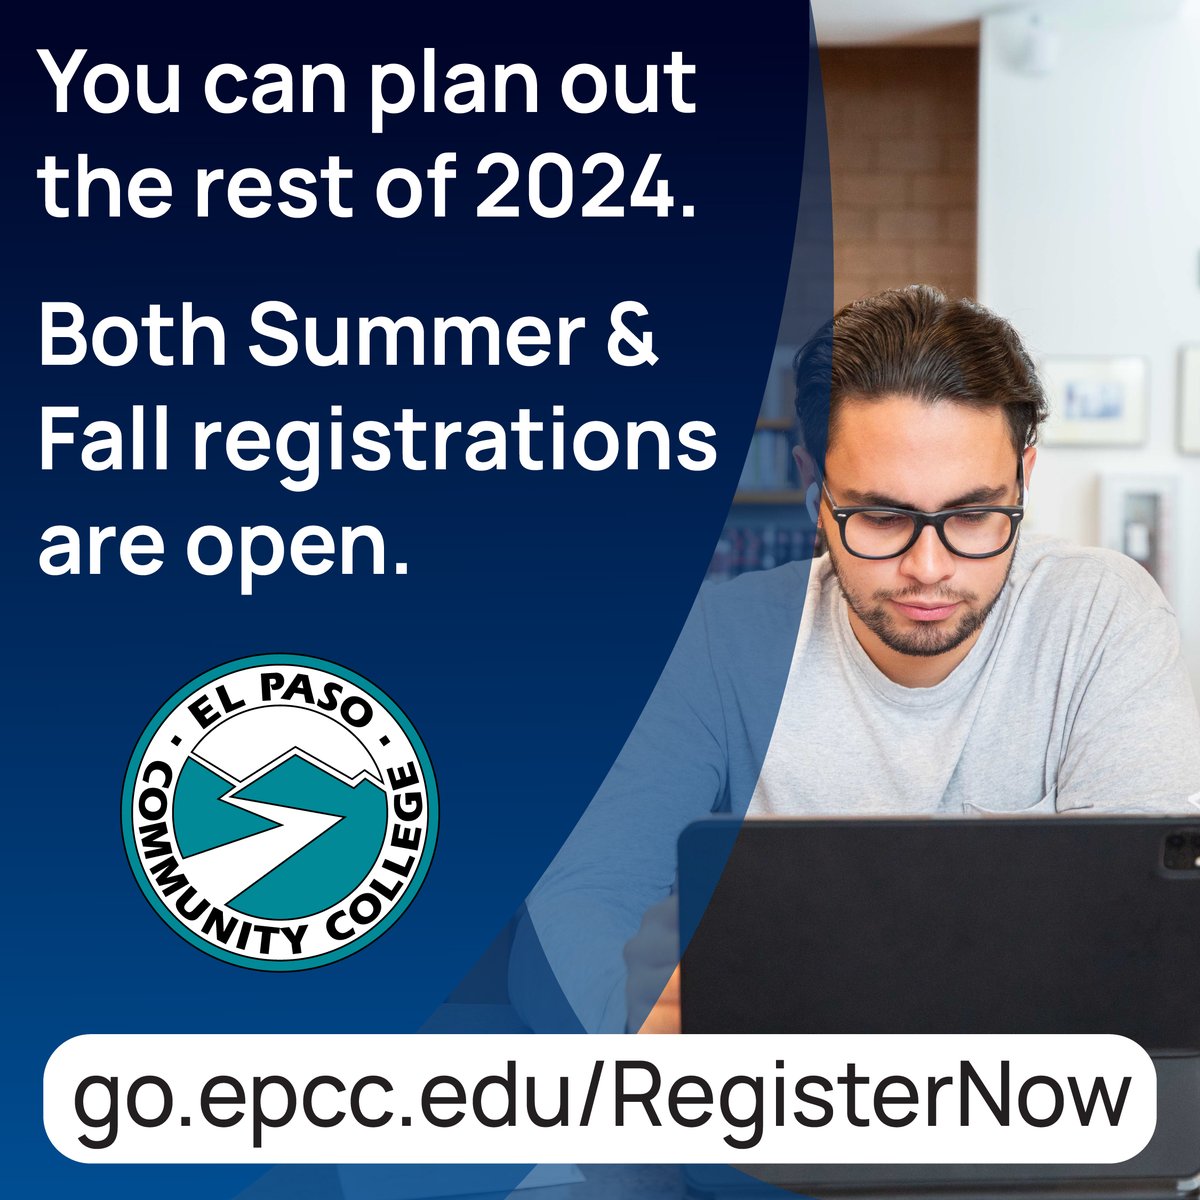 Register for your Summer and Fall classes today at go.epcc.edu/RegisterNow! @EPCCRecruitment